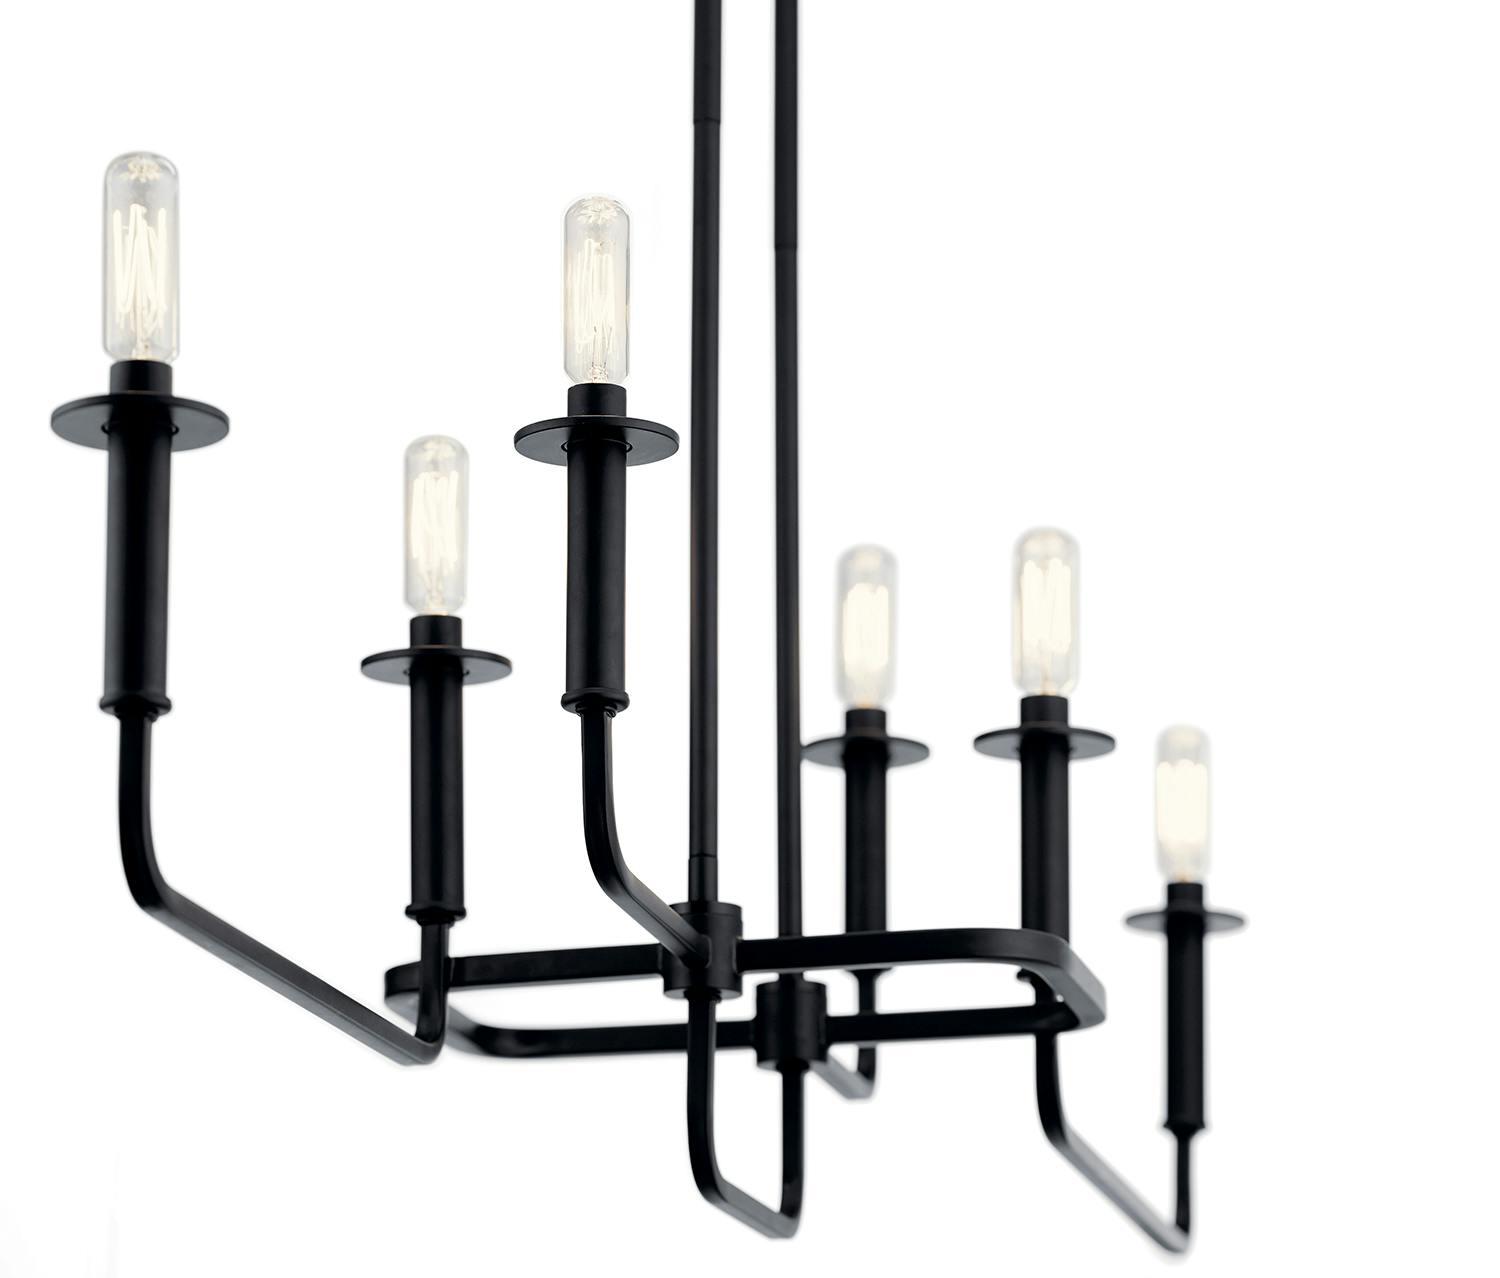 Close up view of the Alden Linear 6 Light Chandelier Black on a white background